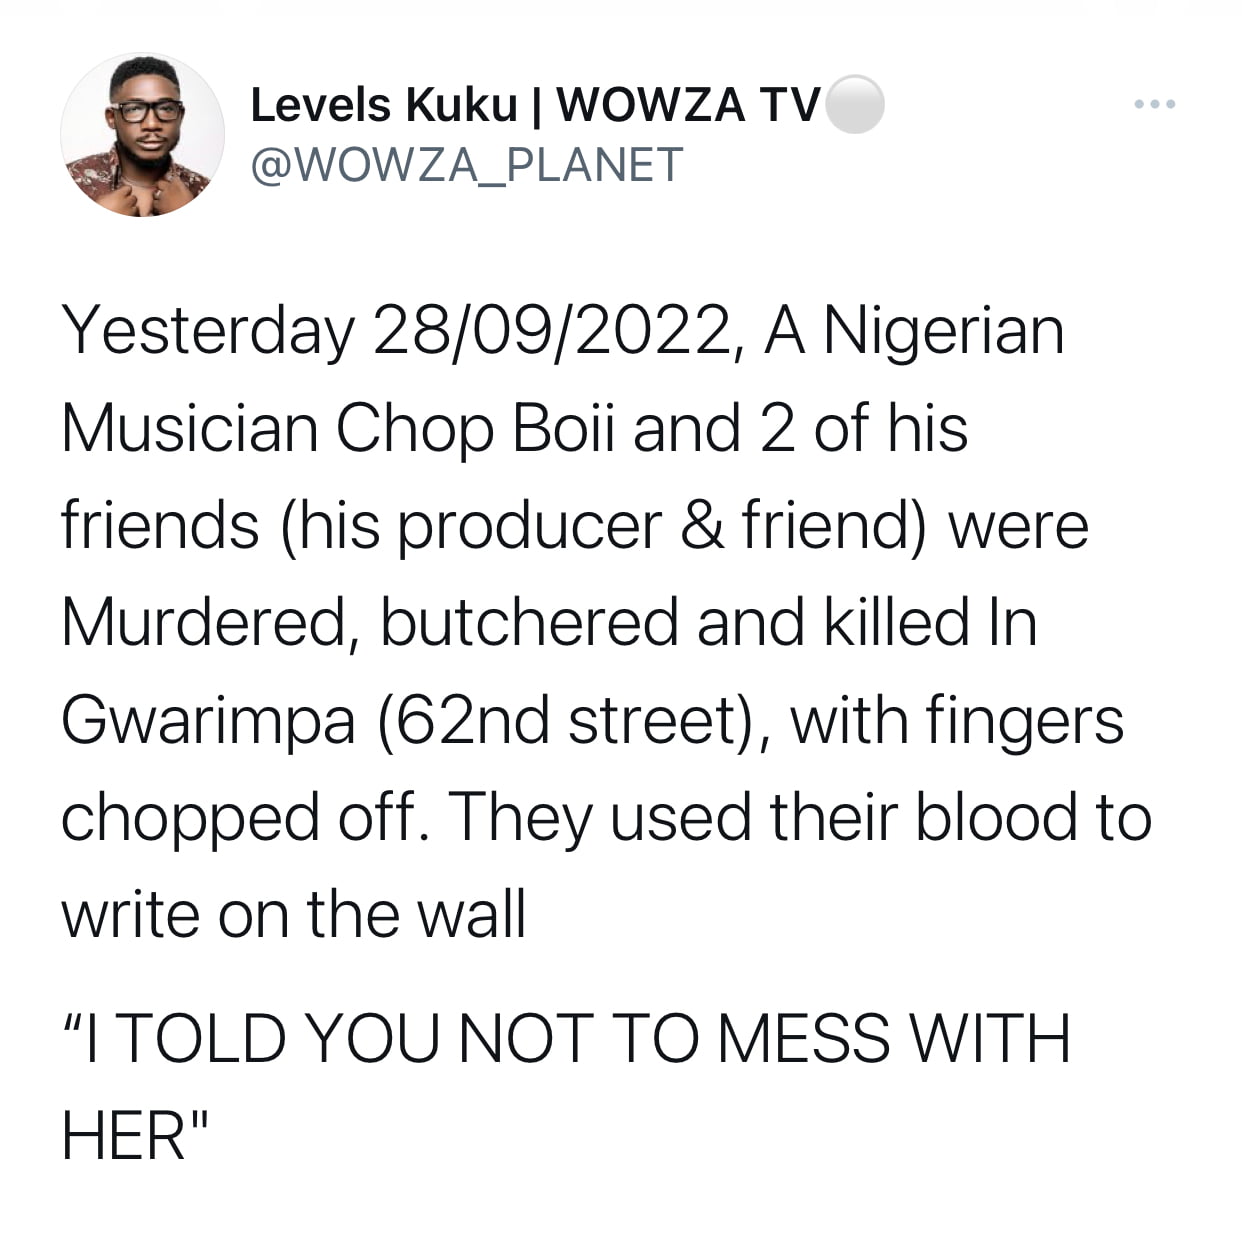 Musician Chop Boli, friends reportedly brutally murdered in Abuja, fingers chopped off